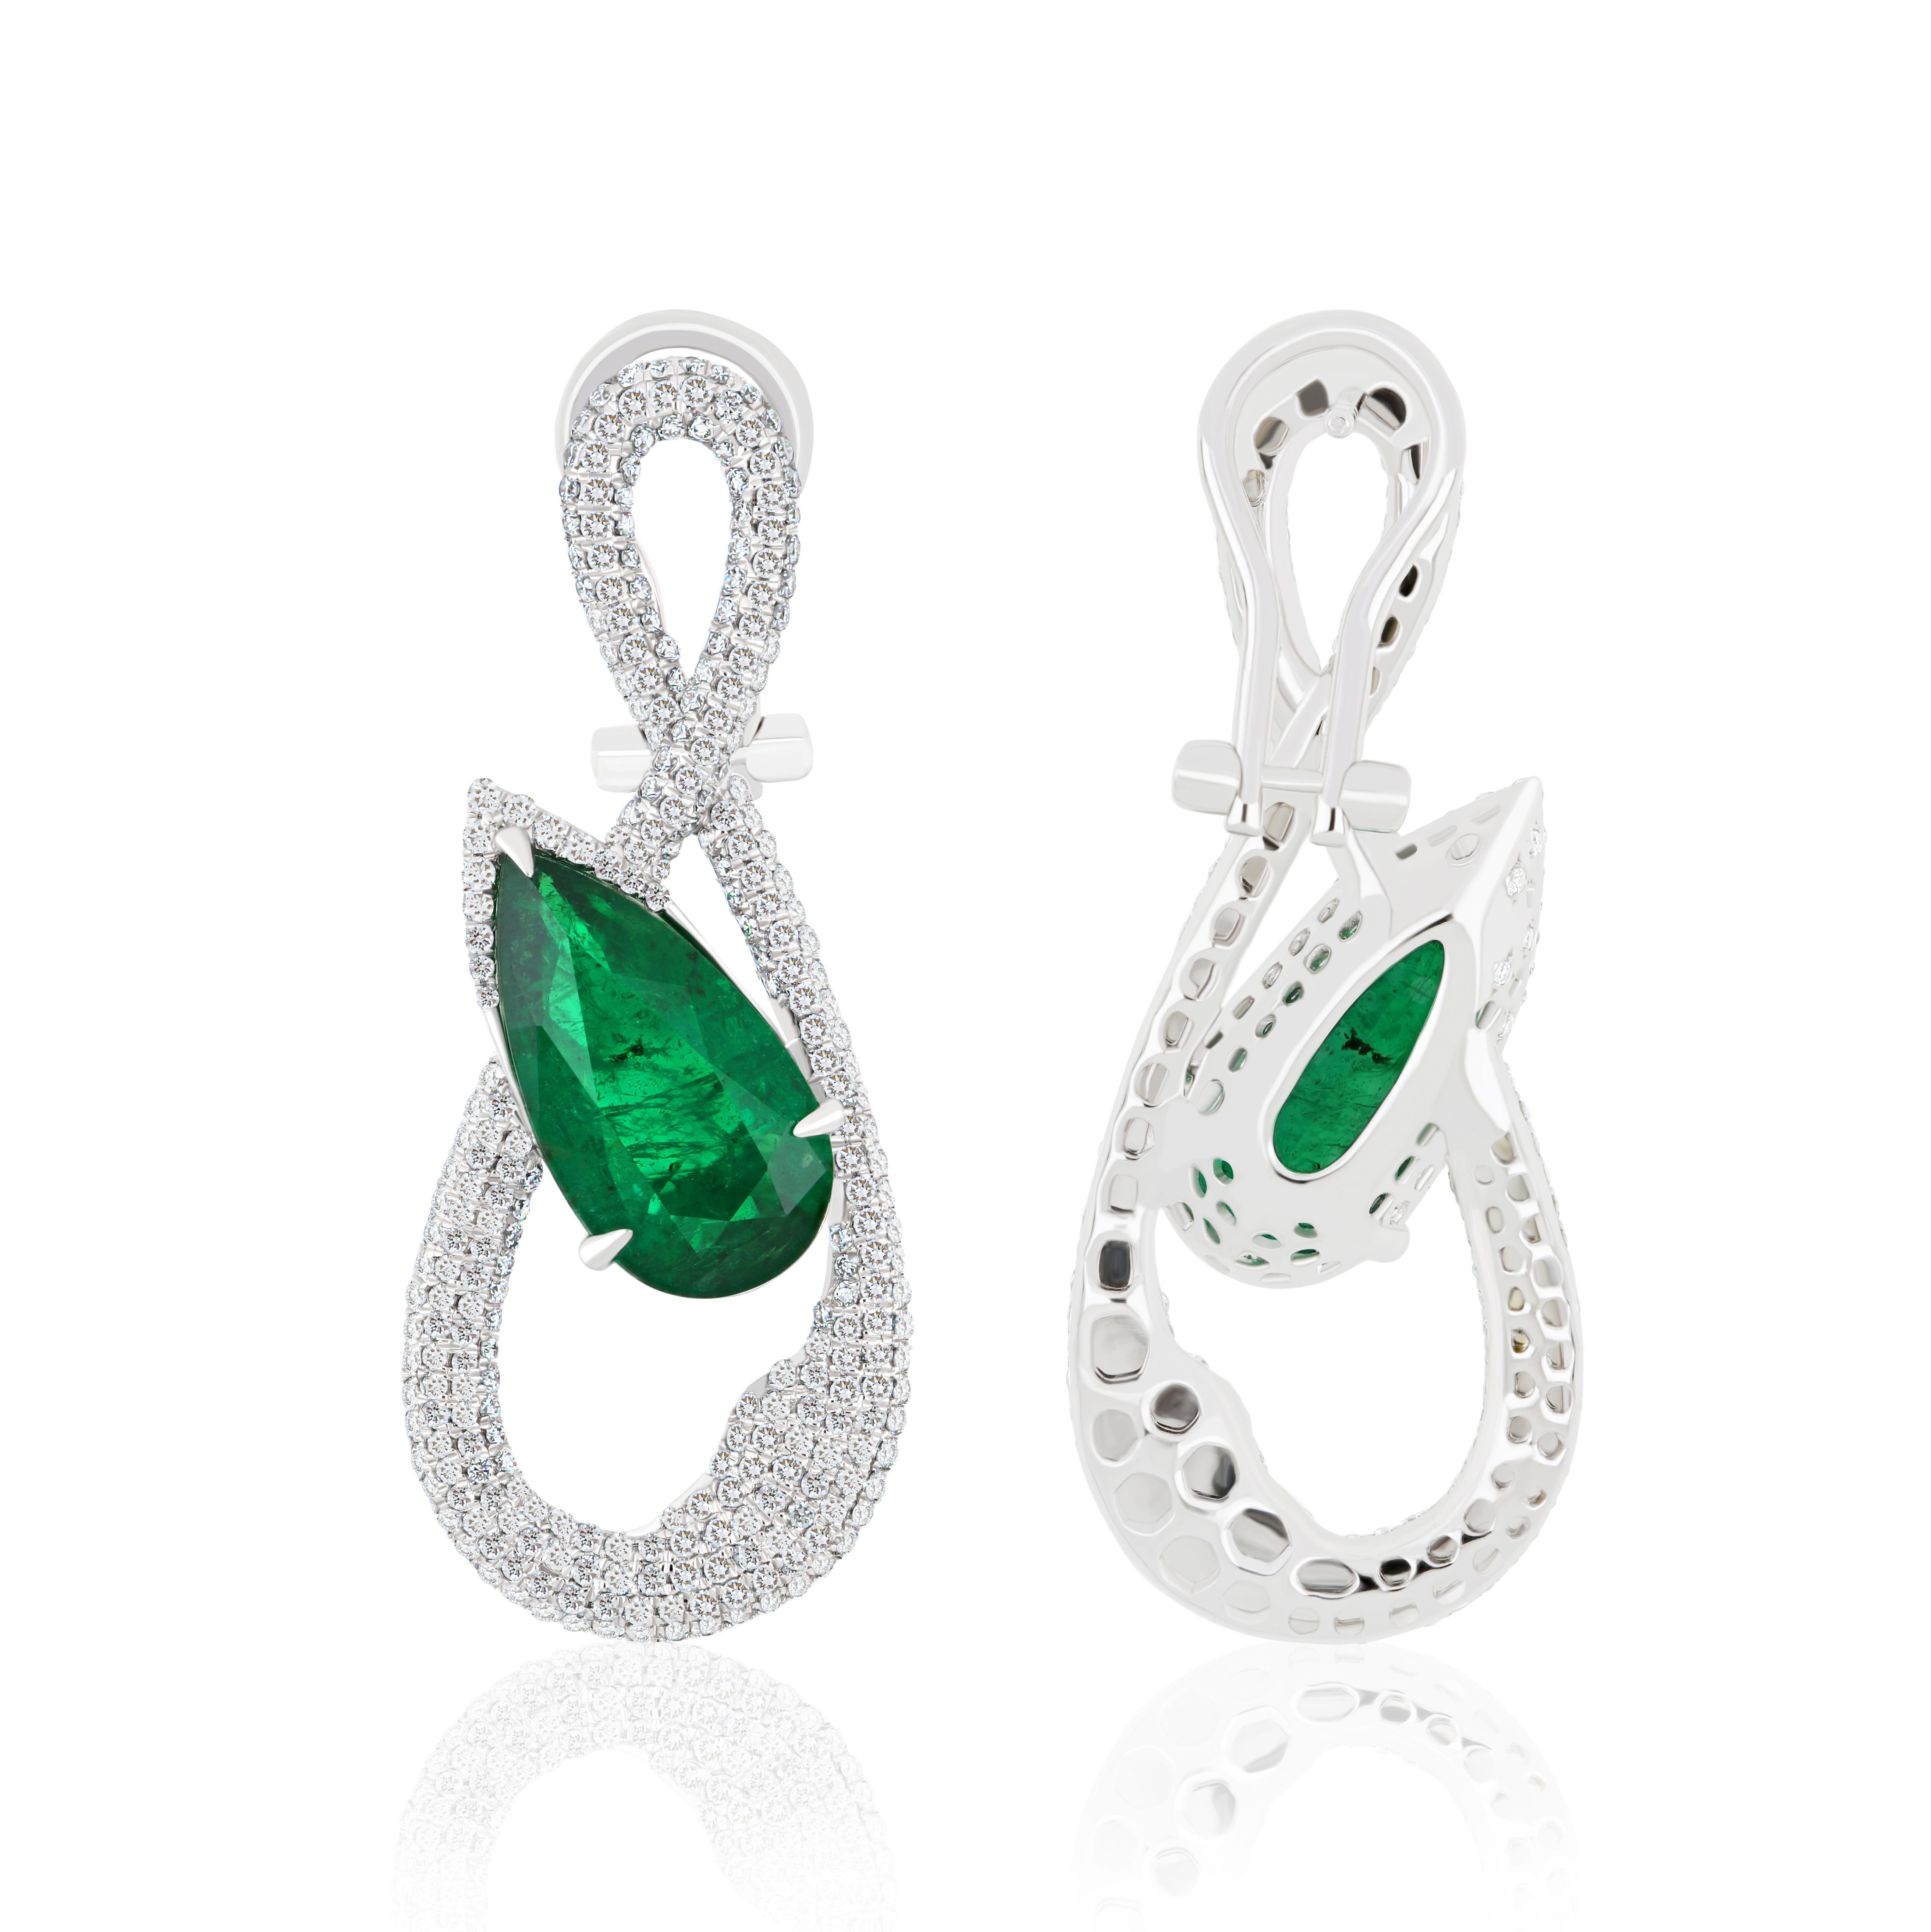 Pear Cut  7.56Cts Emerald & Diamond Earring in 18k White Gold for Charismas Gift Earring  For Sale